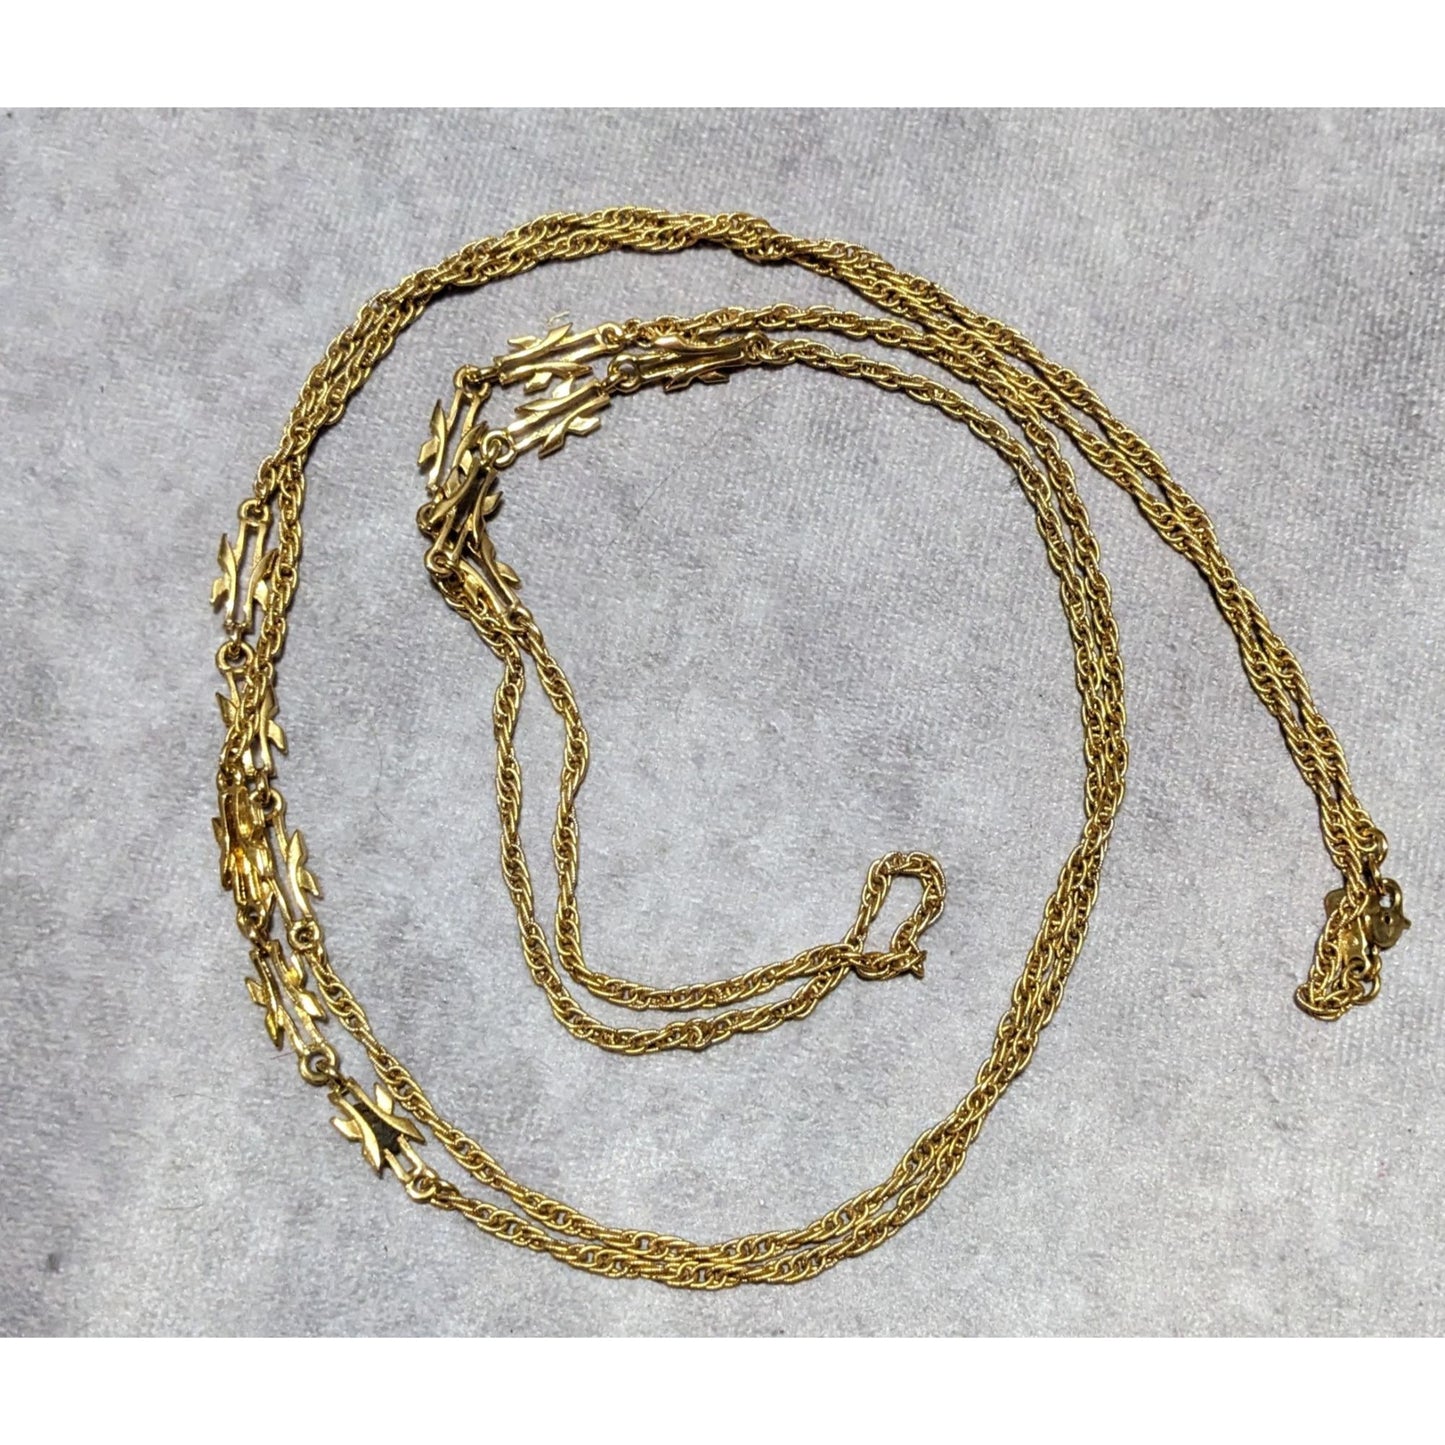 Vintage Monet Rope Chain Necklace